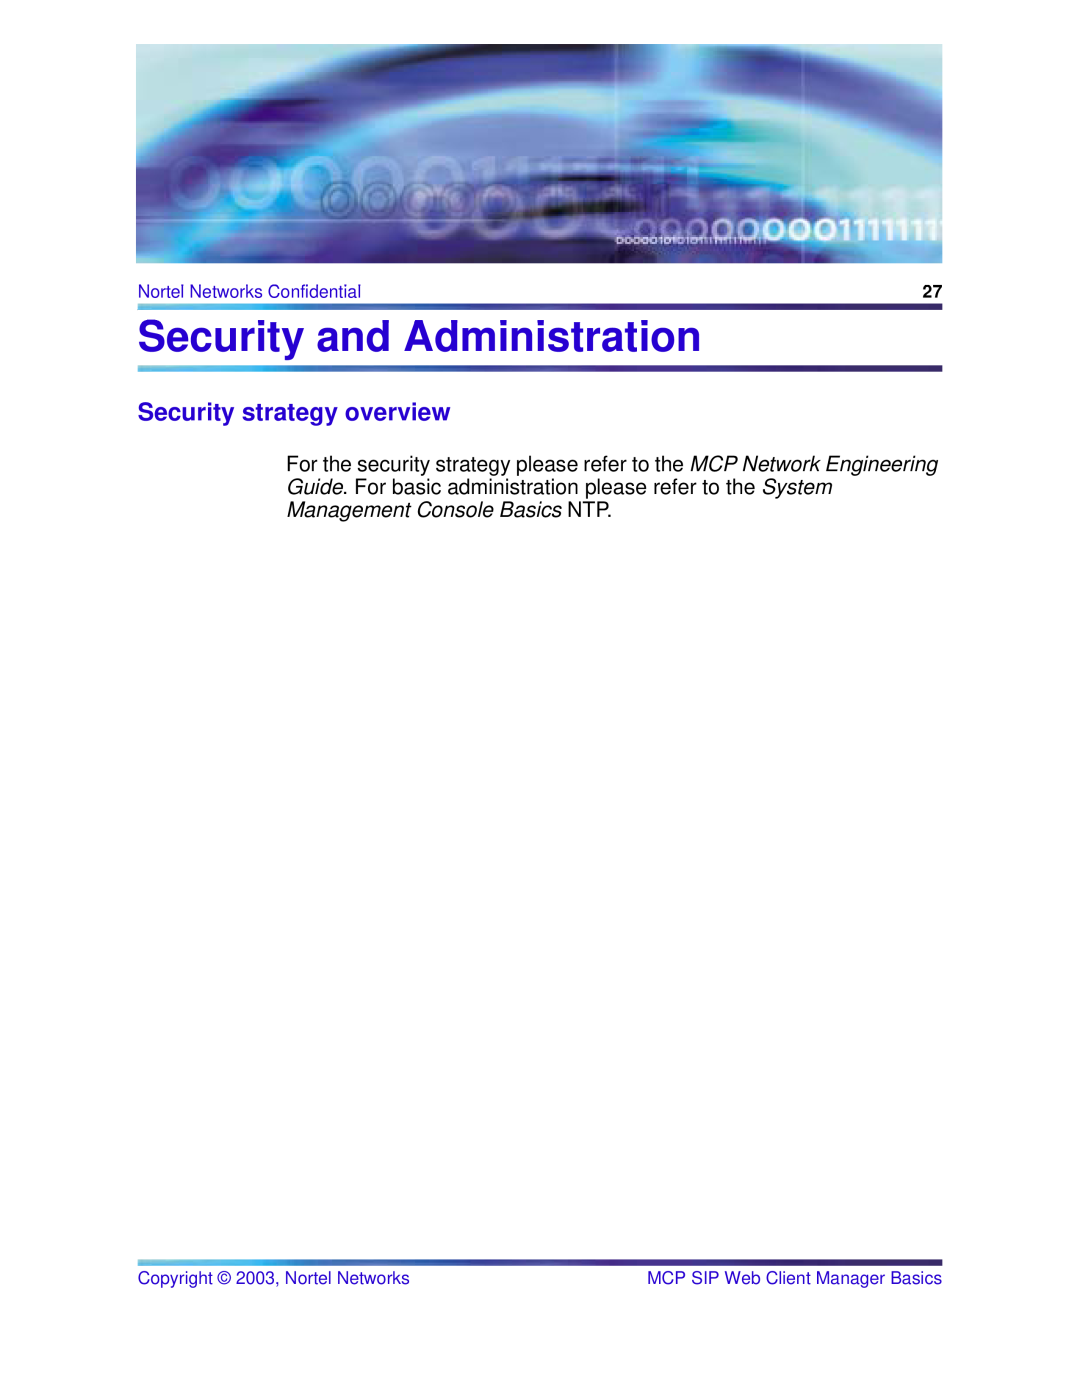 Nortel Networks NN10277-111 manual Security and Administration, Security strategy overview, Nortel Networks Confidential 